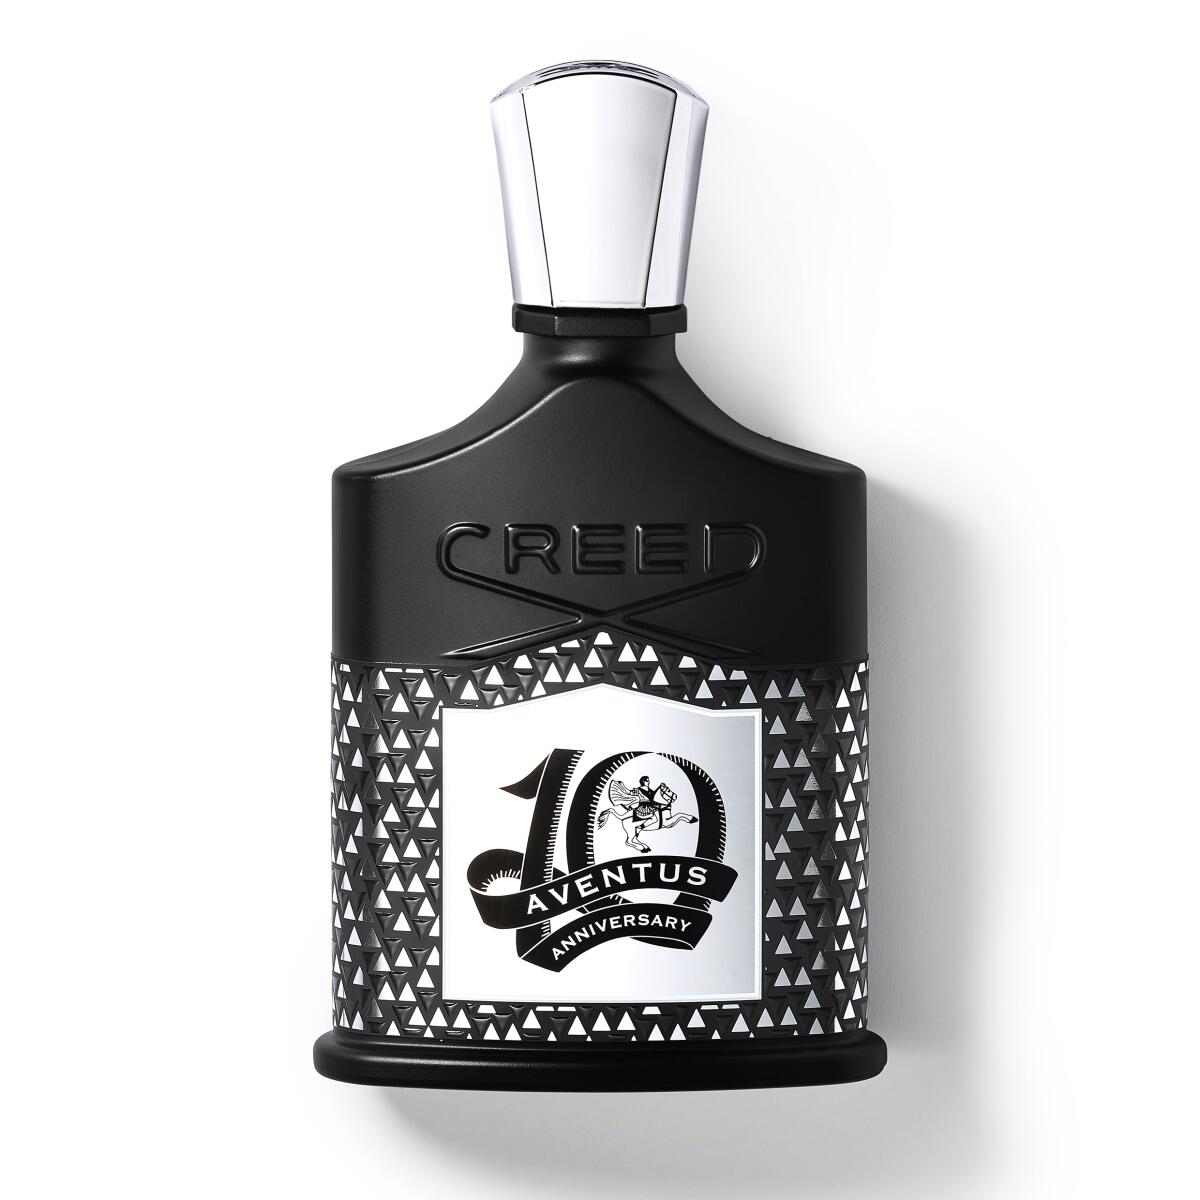 The House of Creed's limited-edition 10th anniversary design edition of Aventus 3.4 oz, 100ml